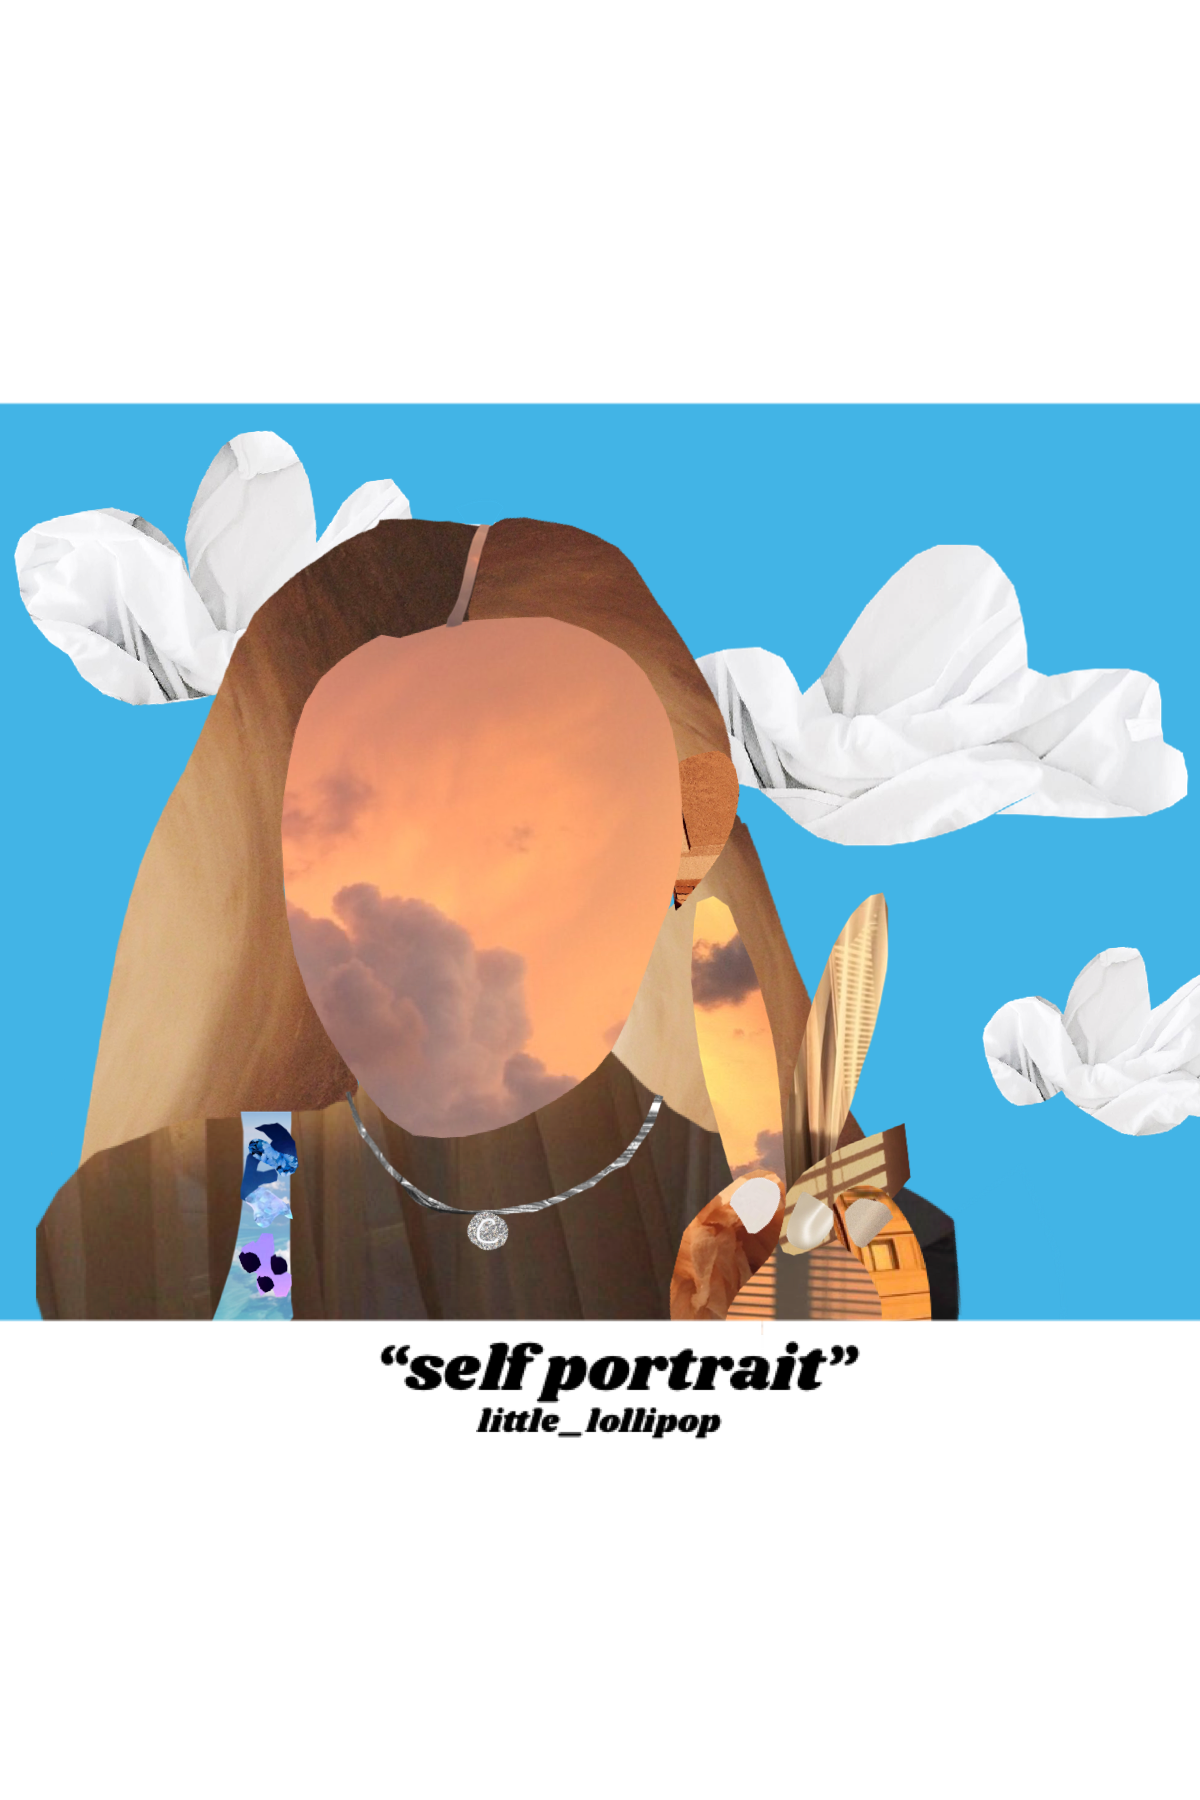 uh i just spent an hour making a self portrait !! never been so proud of a collage🥺 uhh i love it sm!! check out the remixes to see the picture of myself that based myself on! — also side note it’s 12:55 am